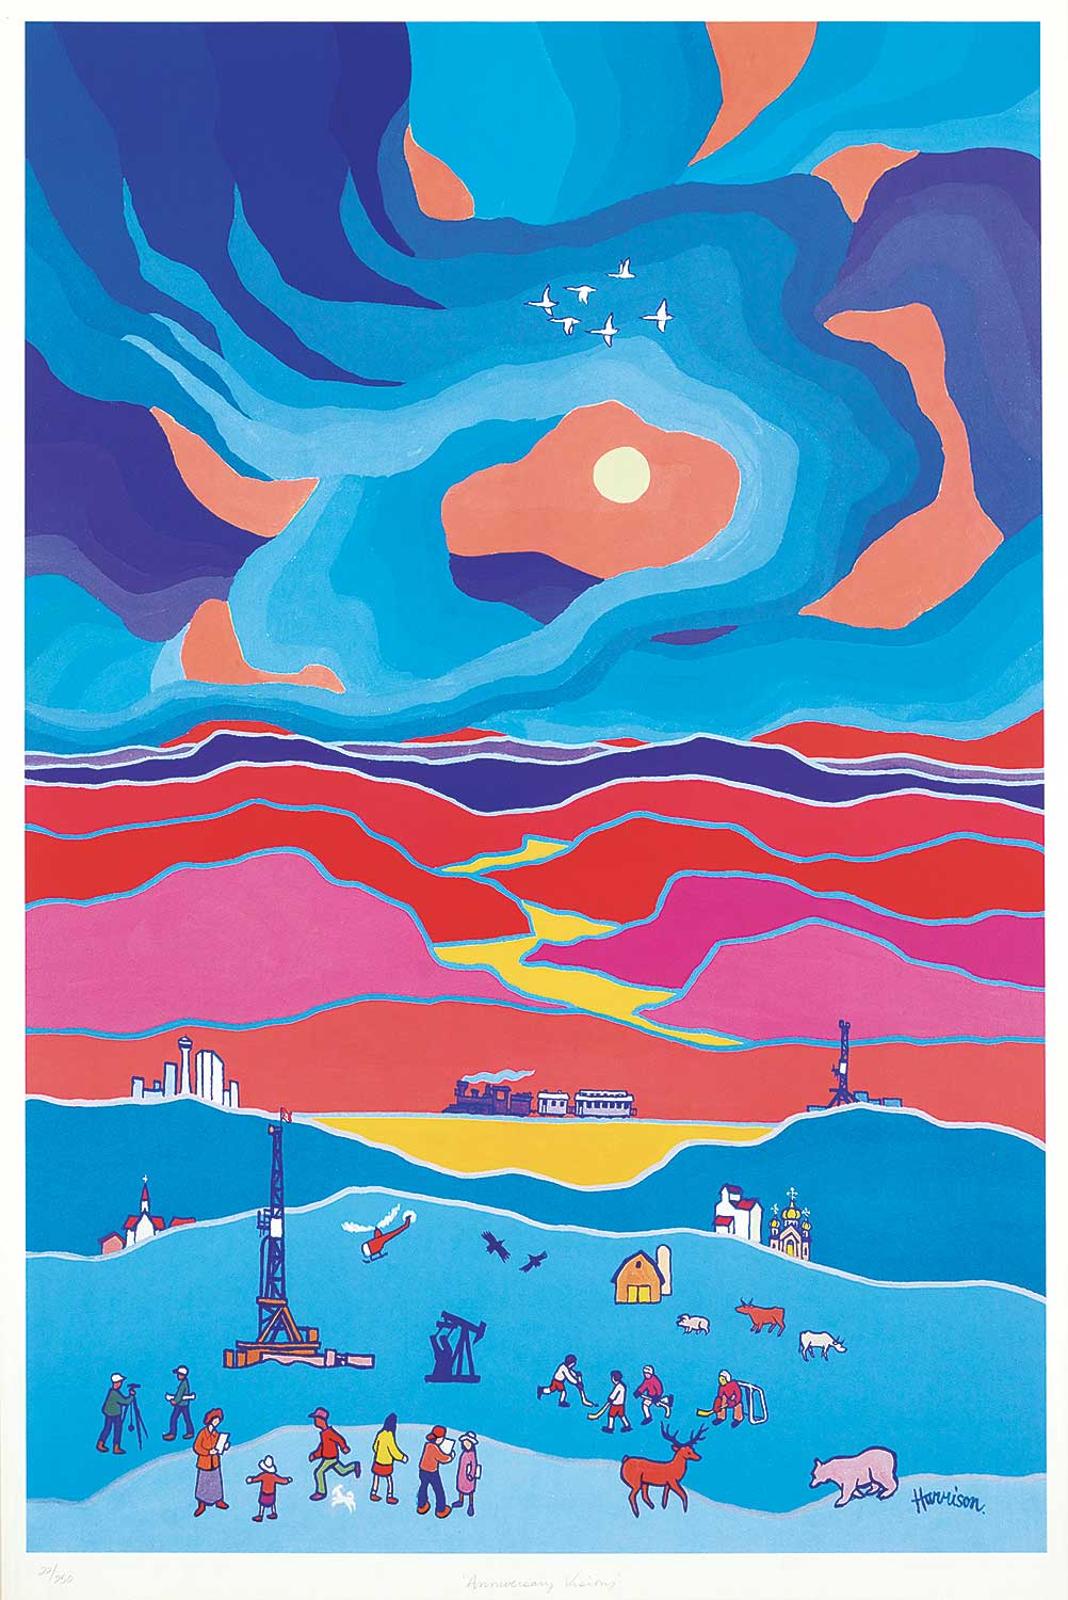 Ted Harrison (1926-2015) - Anniversary Visions  #22/250